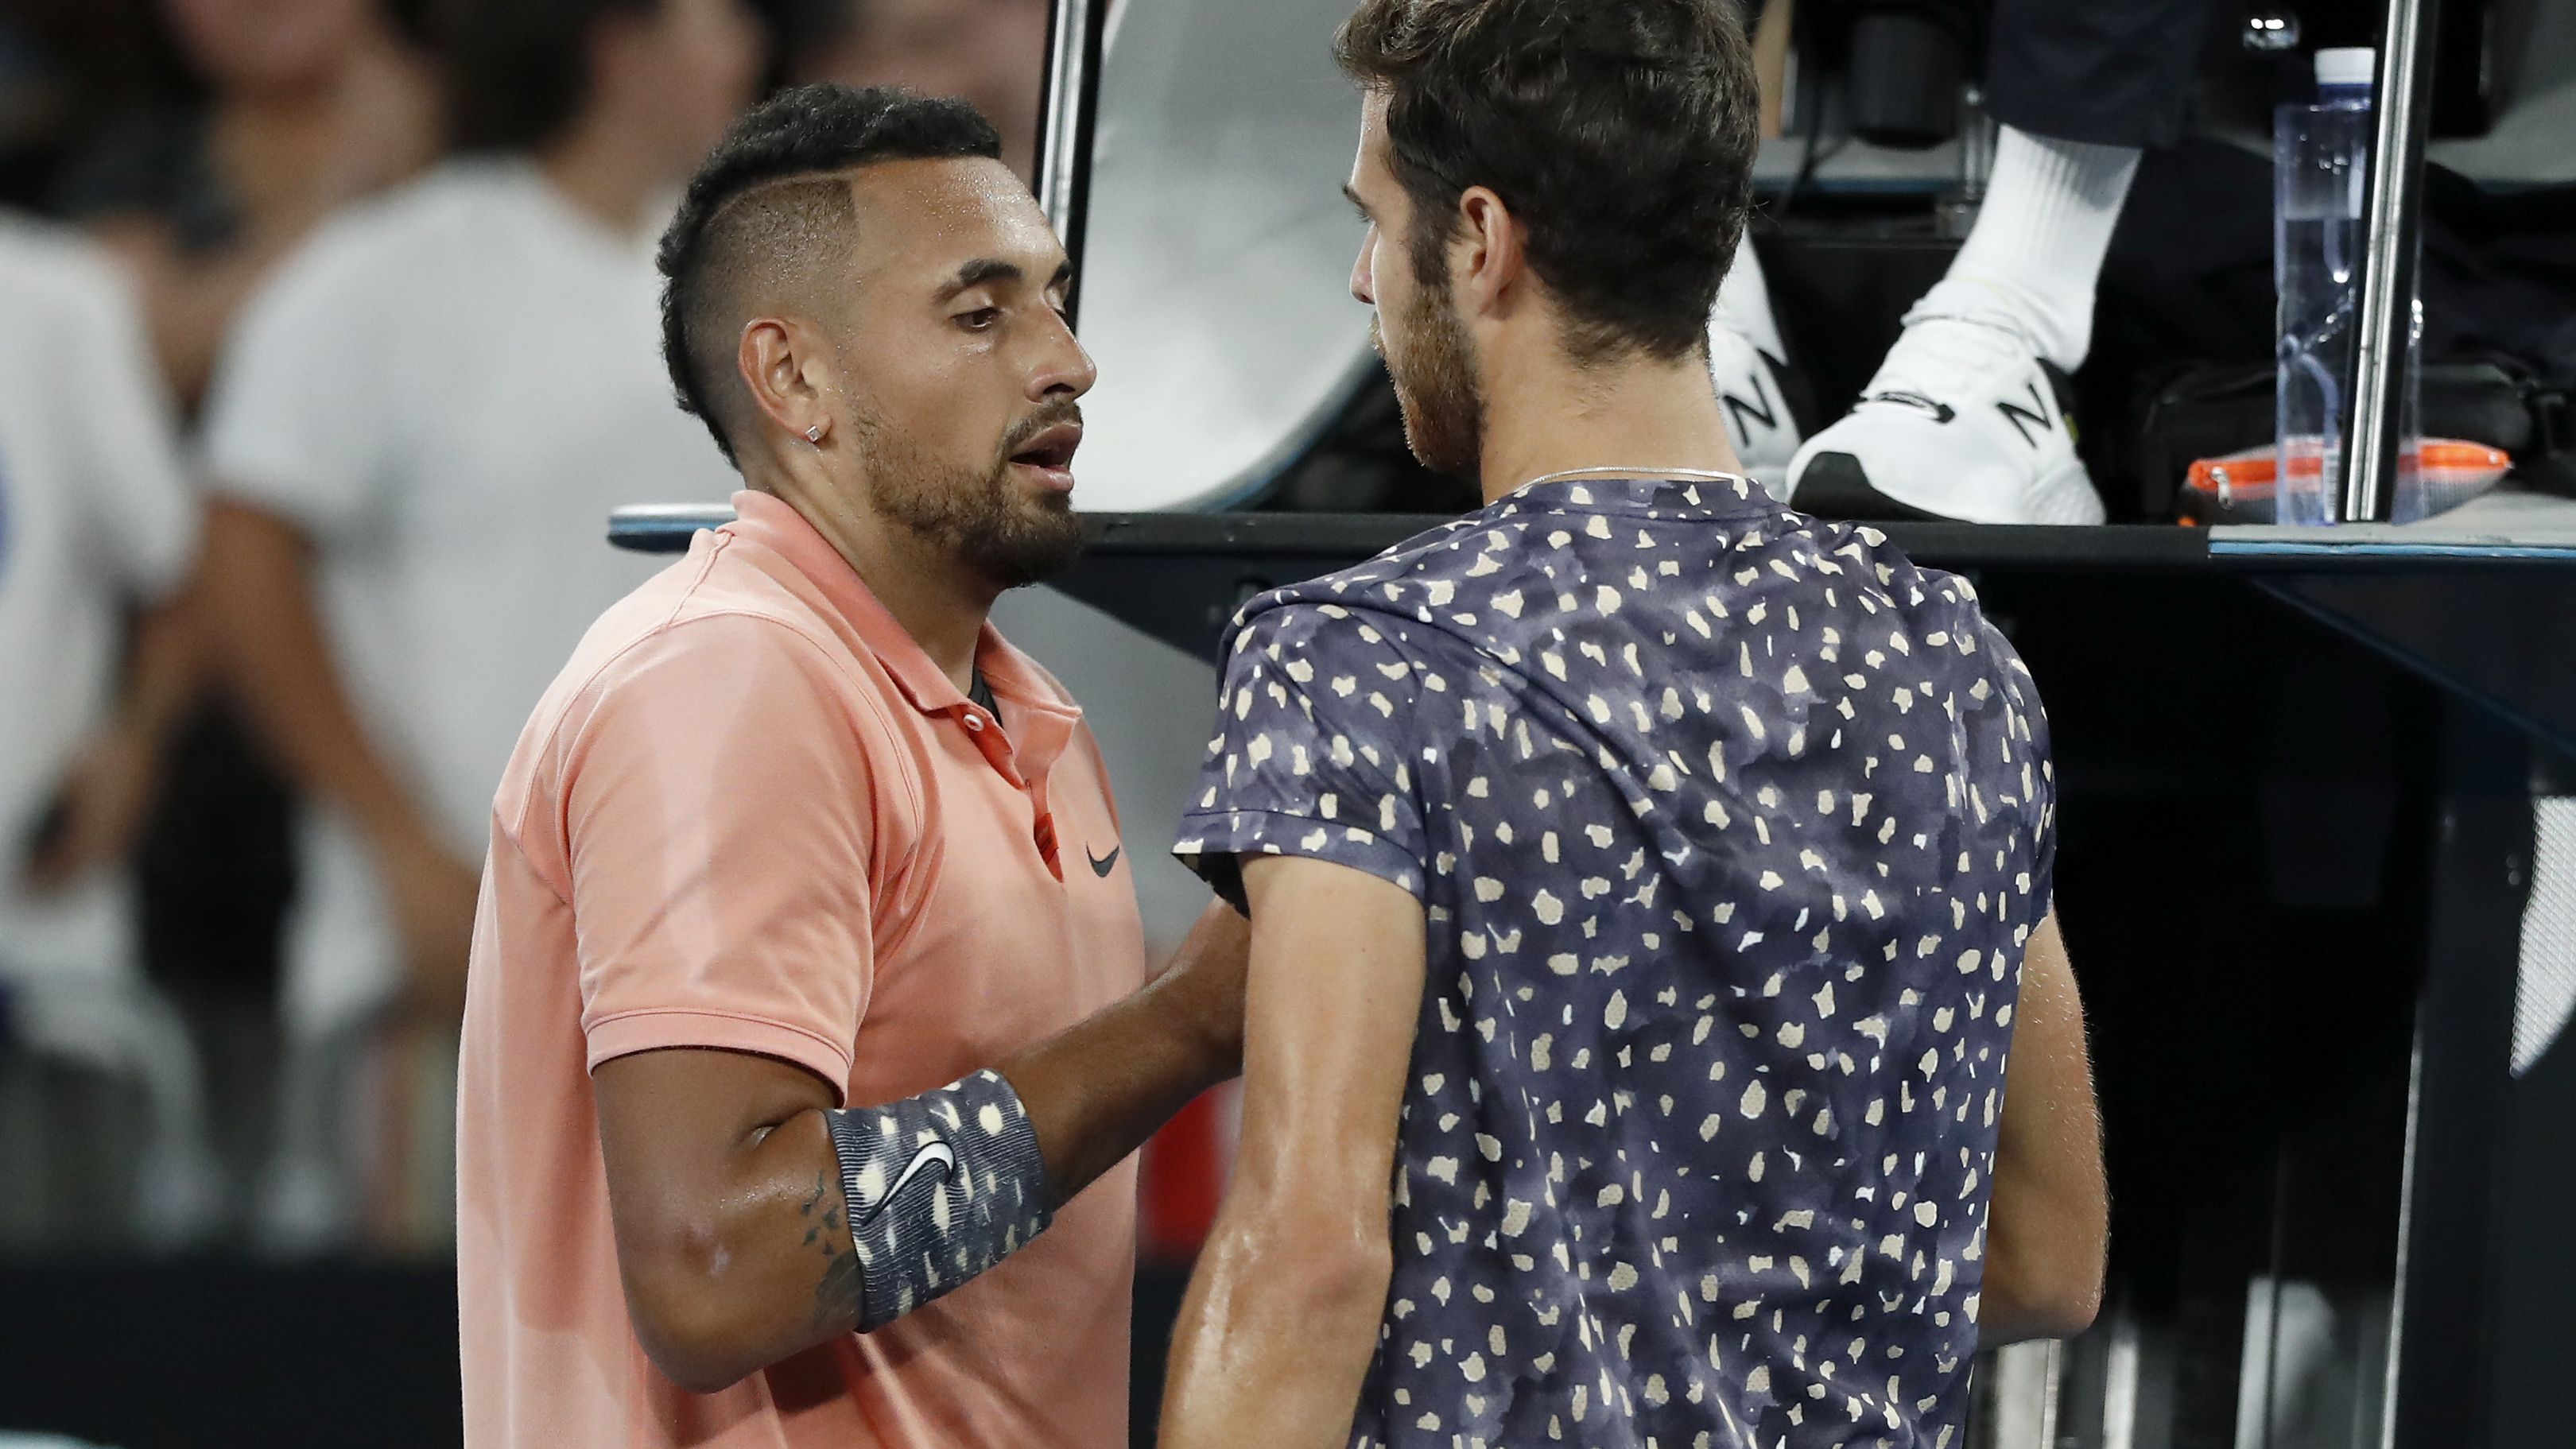 Nick Kyrgios of Australia shakes hands with Karen Khachanov of Russia after their third-round singles match at the 2020 Australian Open.